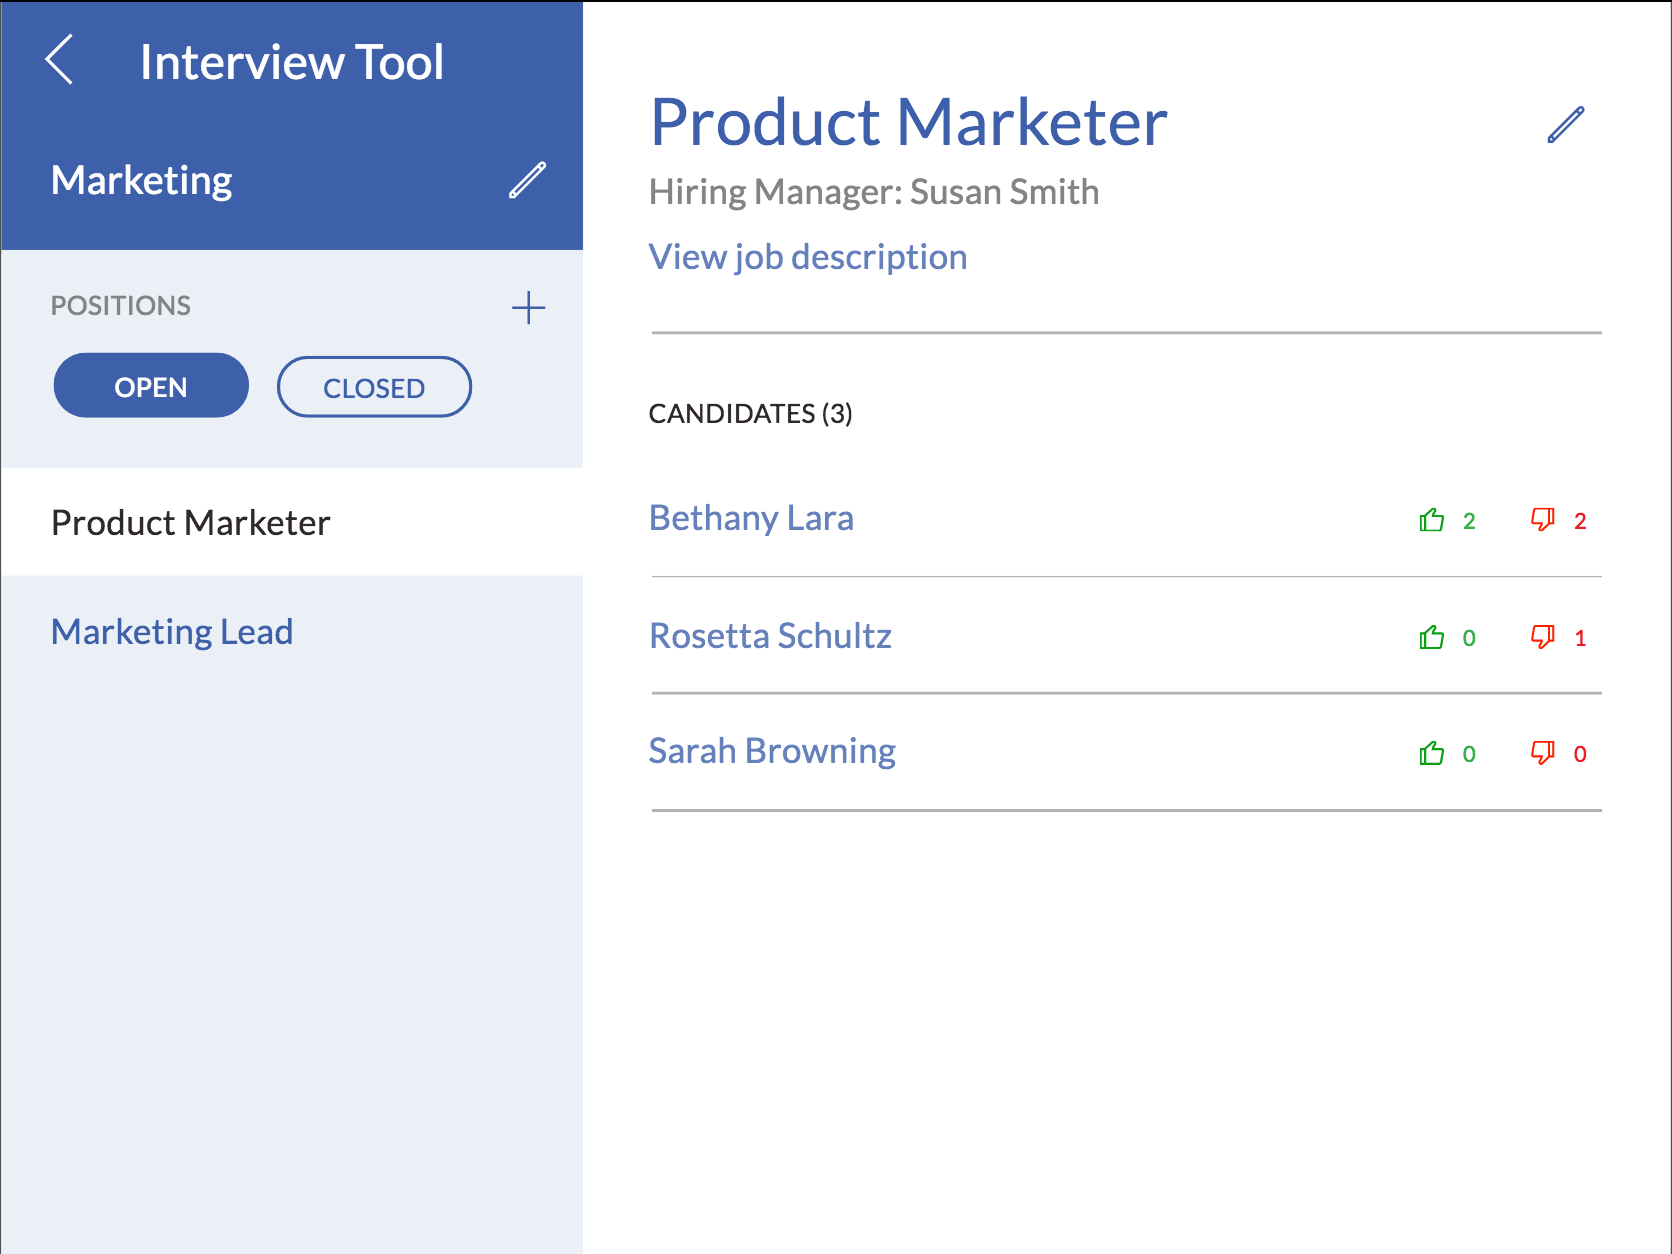 Interview Tool